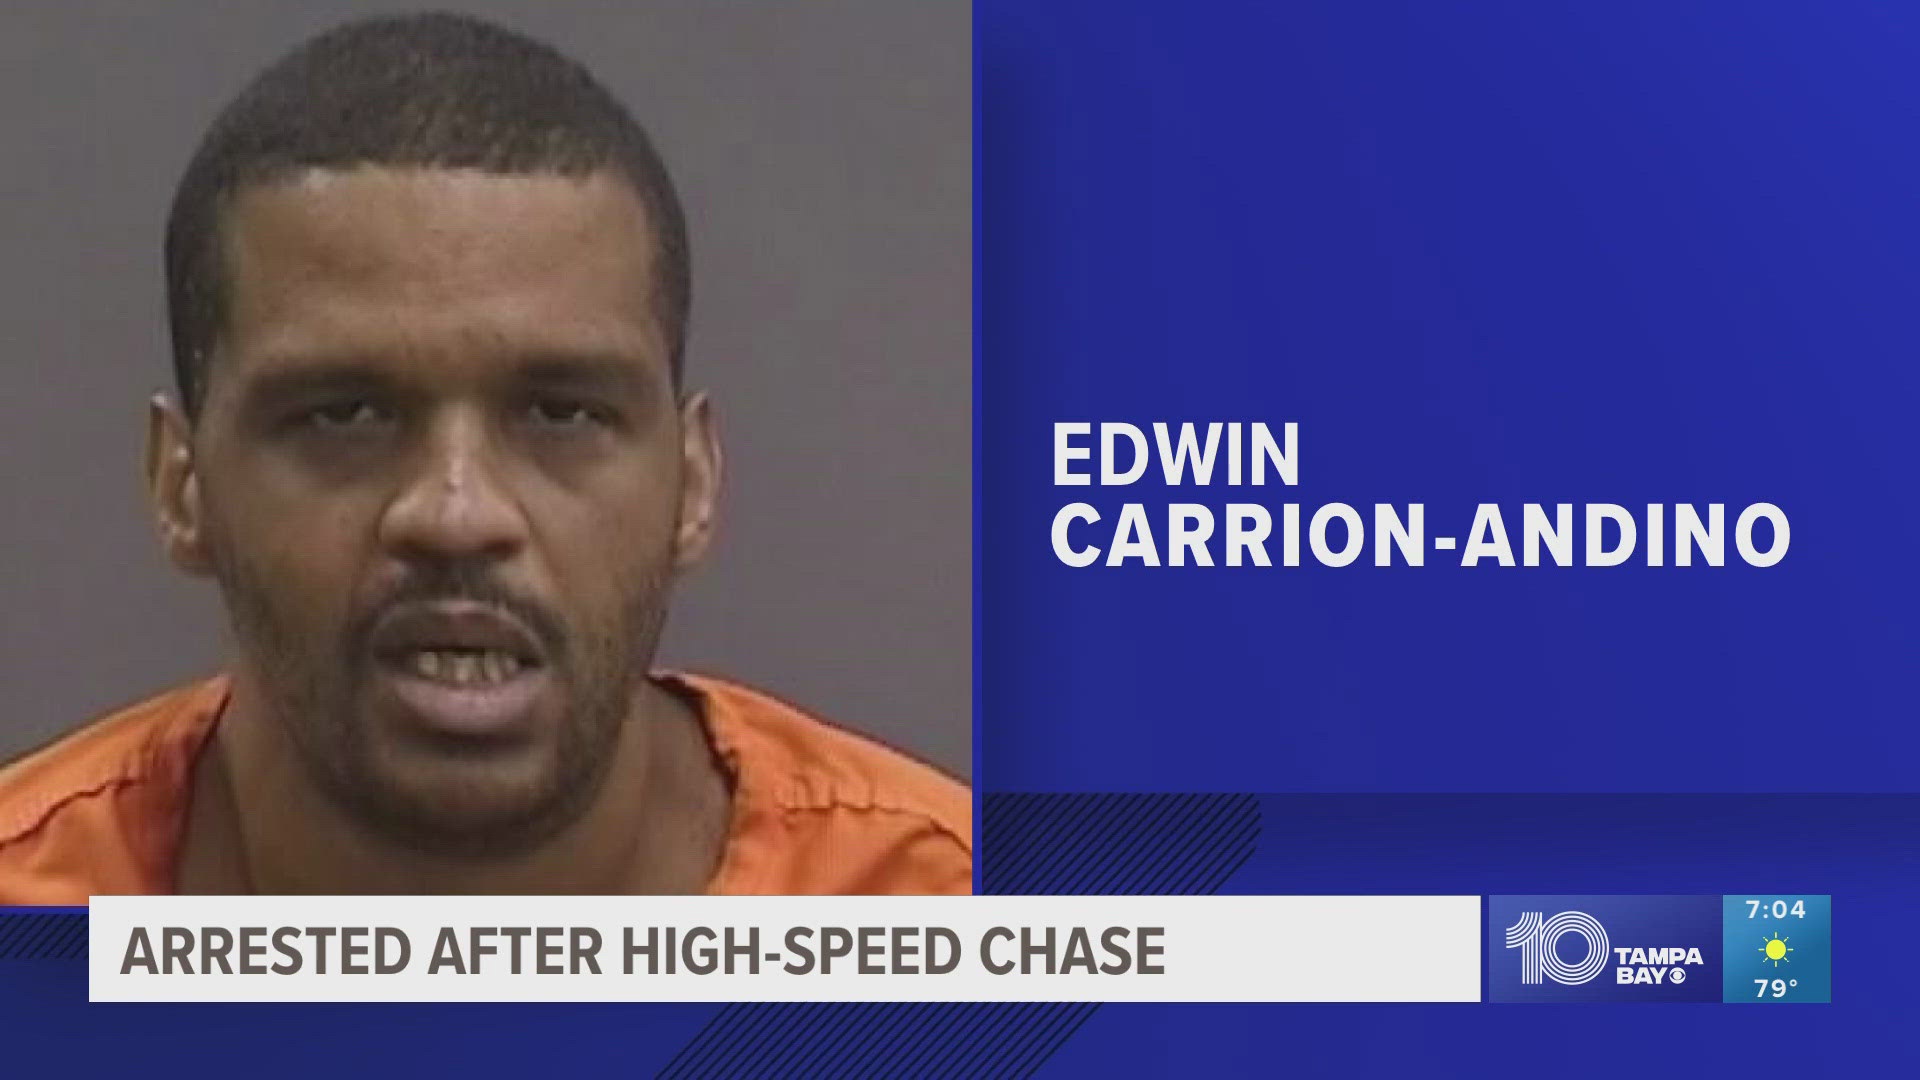 A man allegedly driving a stolen vehicle with a license revoked for over a decade and while high, led law enforcement on a high-speed chase before crashing into anot